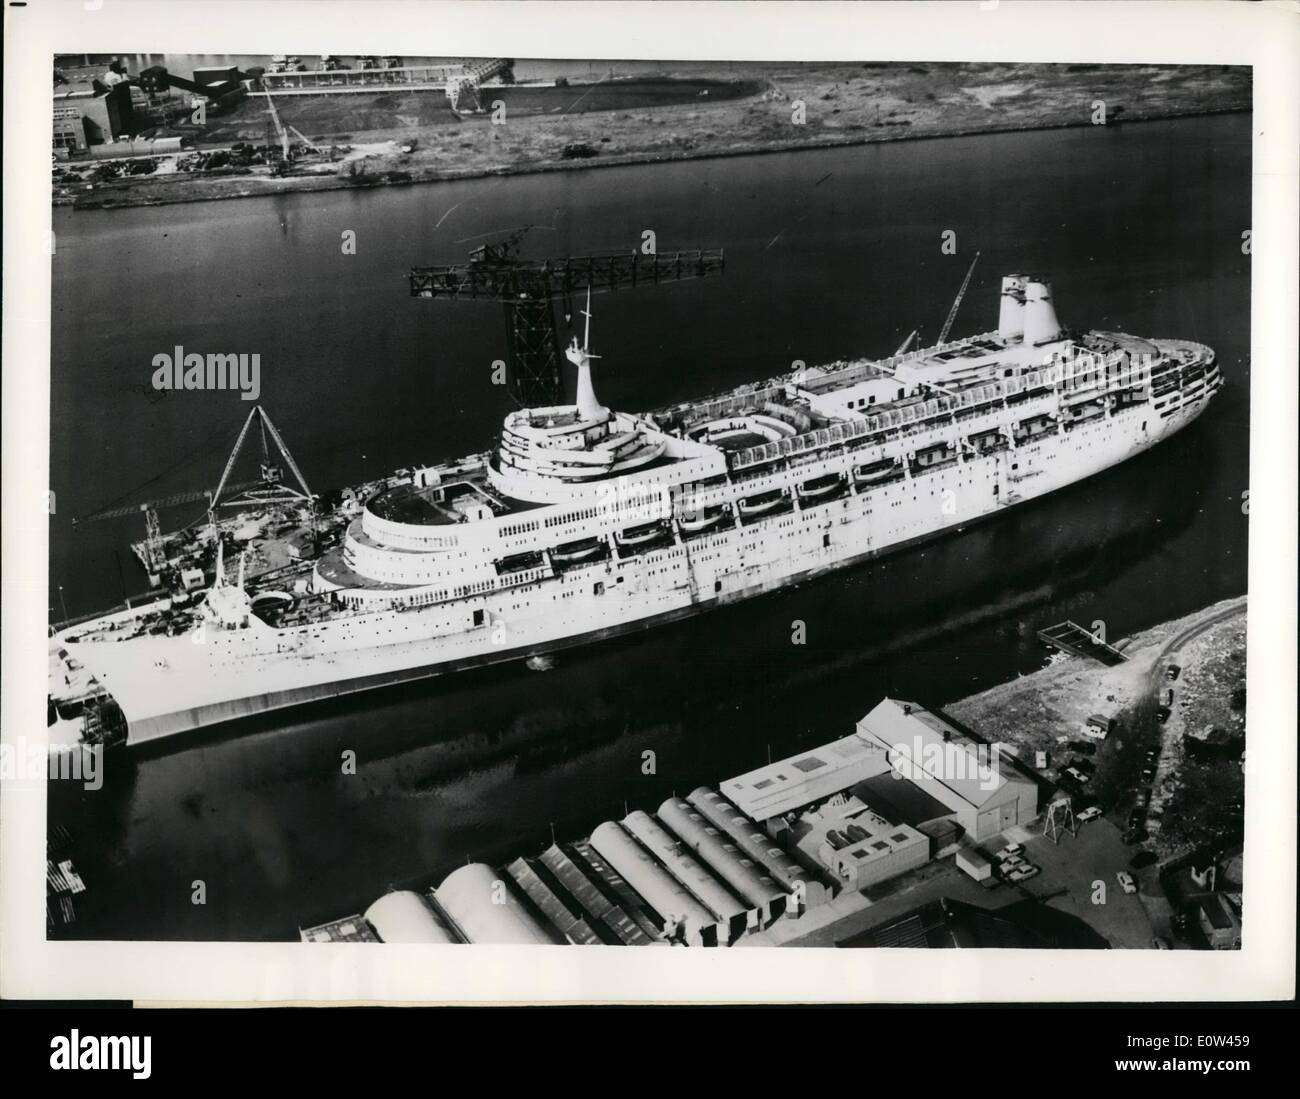 Apr. 04, 1961 - Due In June: In the Belfast, Northern Ireland, shipyard, of Harland and Wolff where 4,000 men are working day and night on her, is the new 45,000-ytons P. and O. liner Canberra, Britain's biggest post war liner for completion on April 29th and to sail on her maiden voyage from Southampton, England, on June 2. The view from above shows some of derivations such as the aluminum bridge and two streamlined stacks,placed aft, instead of normal funnels. Below decks and not shown is an automatic conveyor baggage system Stock Photo